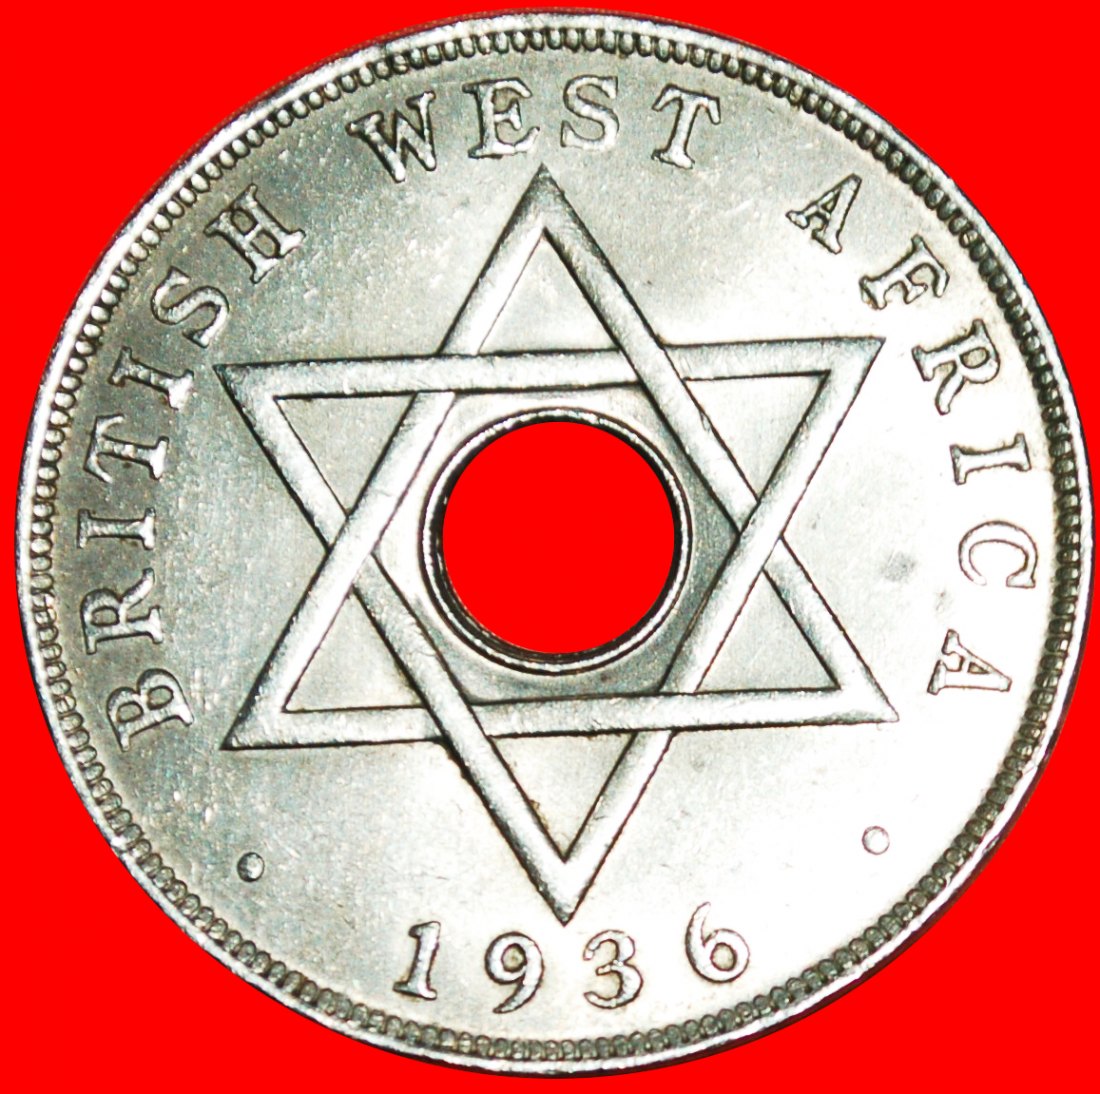  * GREAT BRITAIN STAR OF DAVID:BRITISH WEST AFRICA★1 PENNY 1936KN★MINT LUSTRE★LOW START ★ NO RESERVE!   